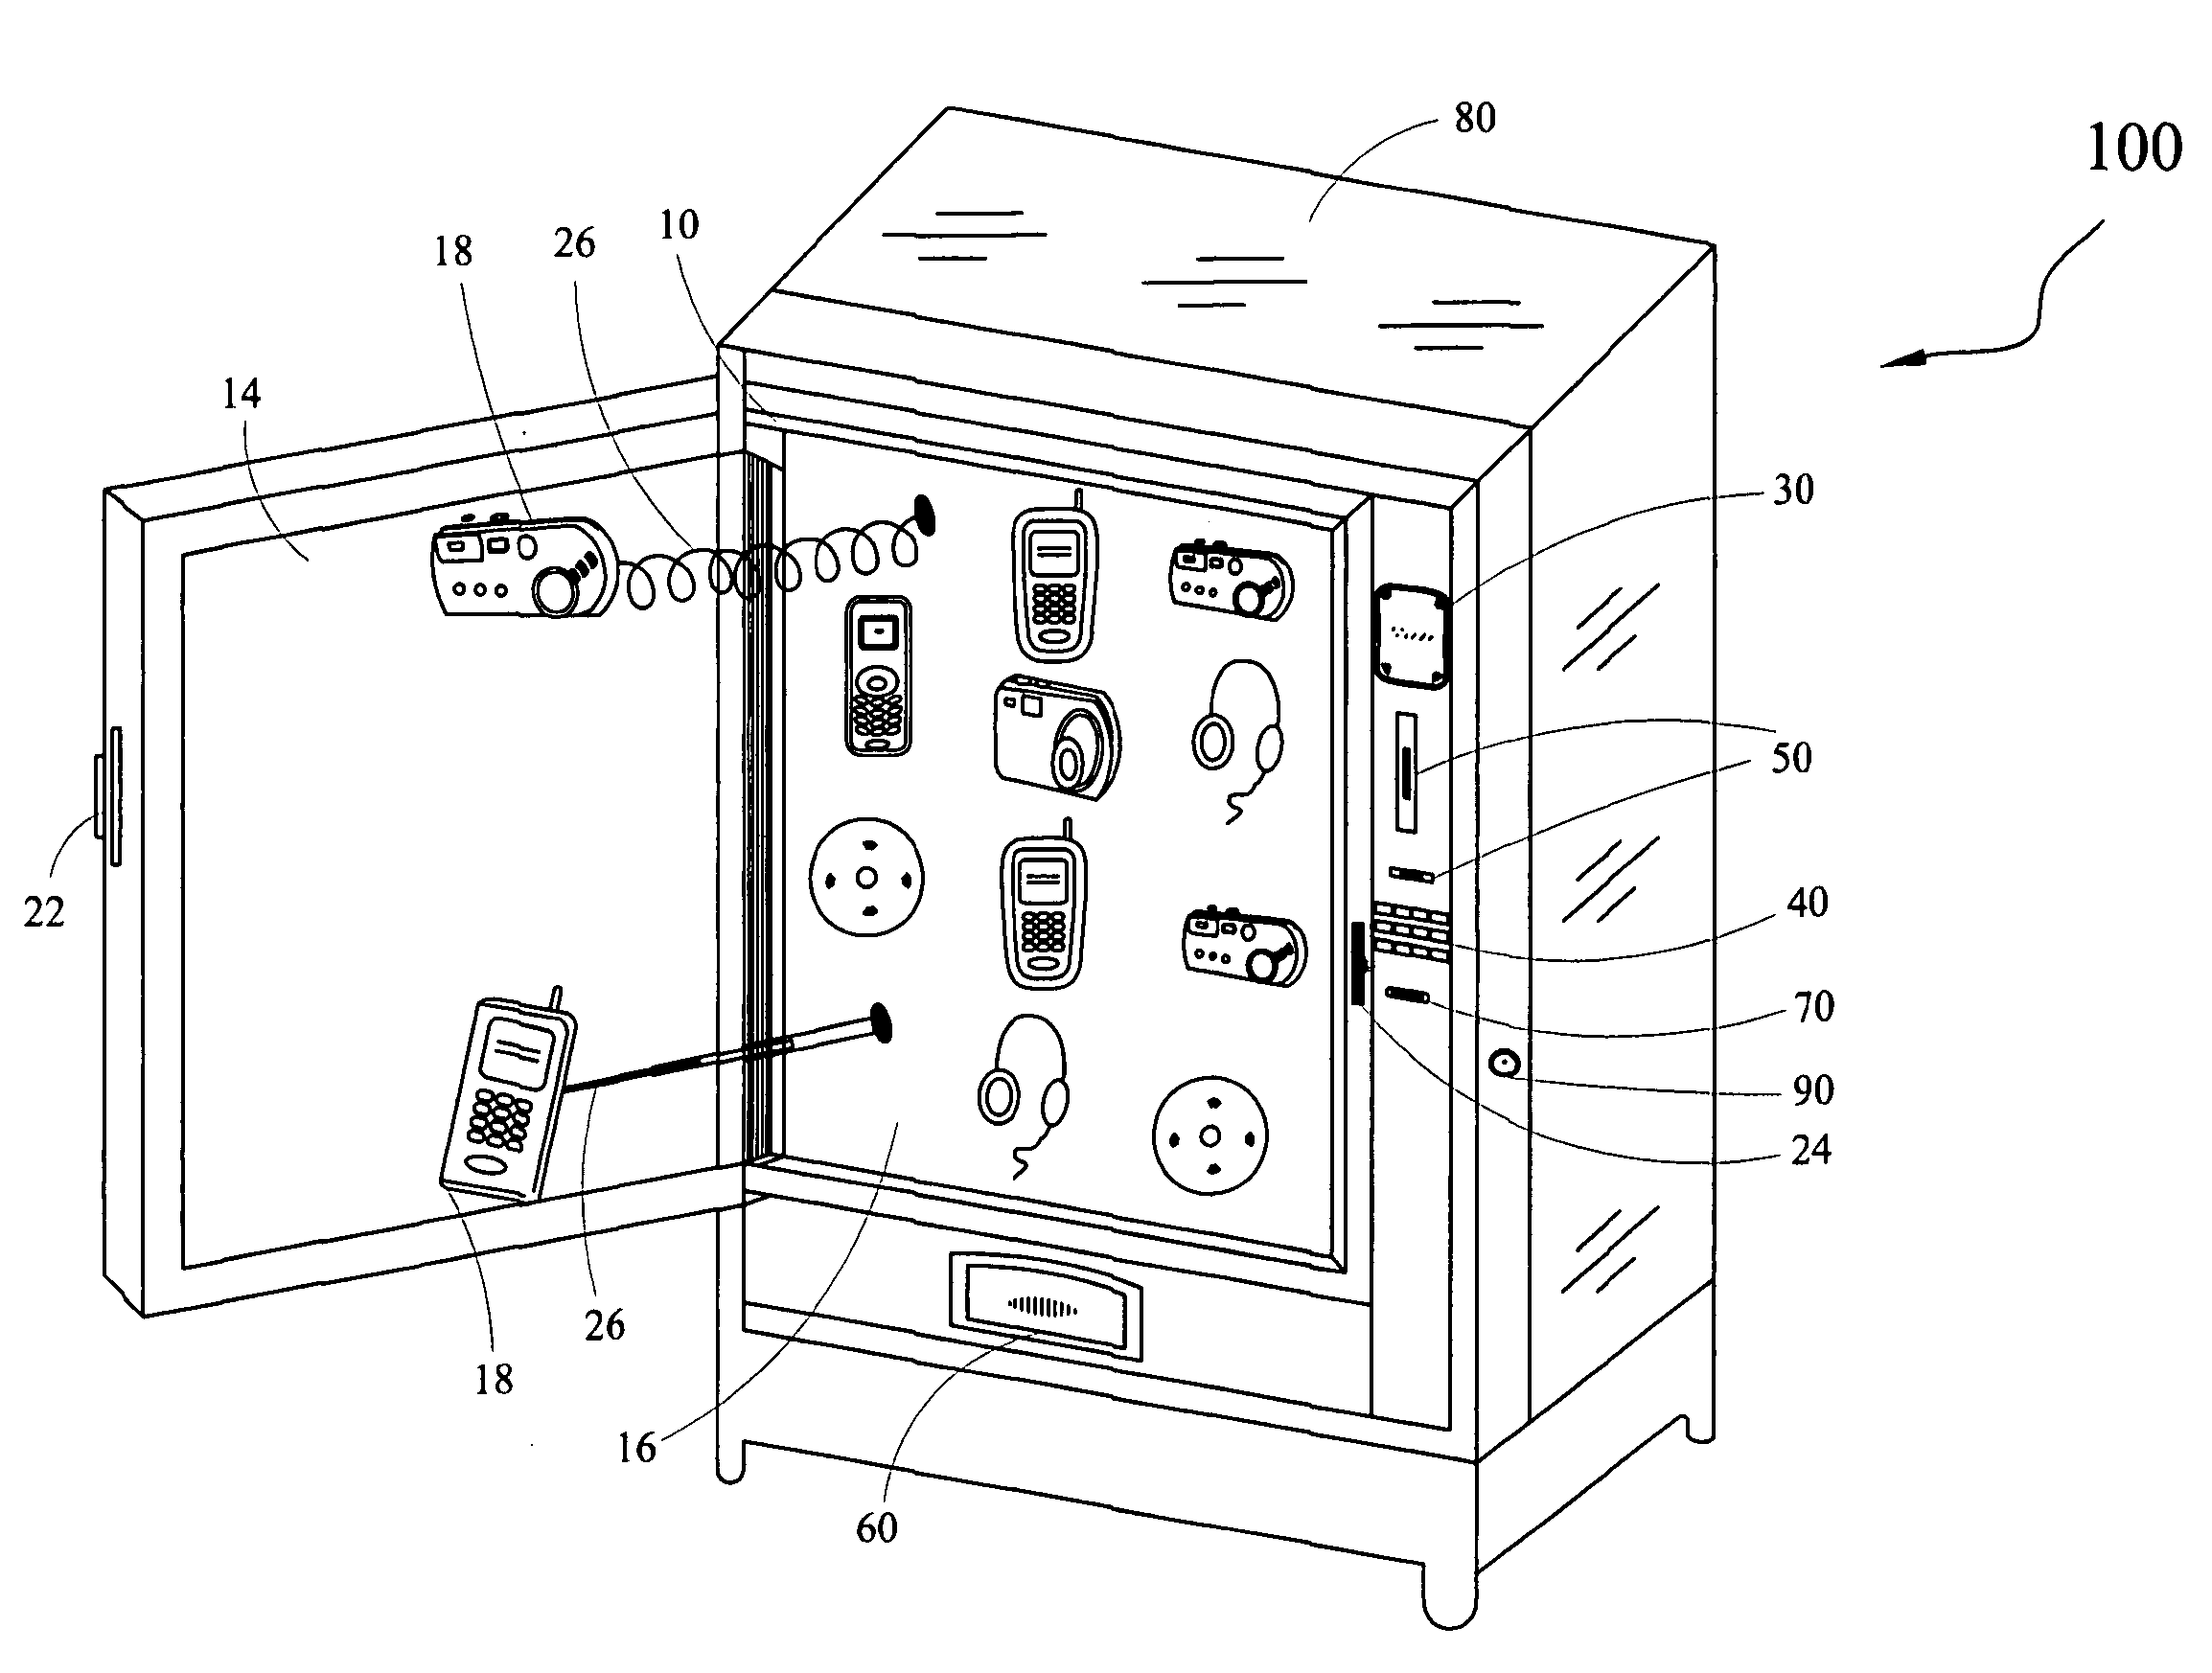 Browsing and vending system